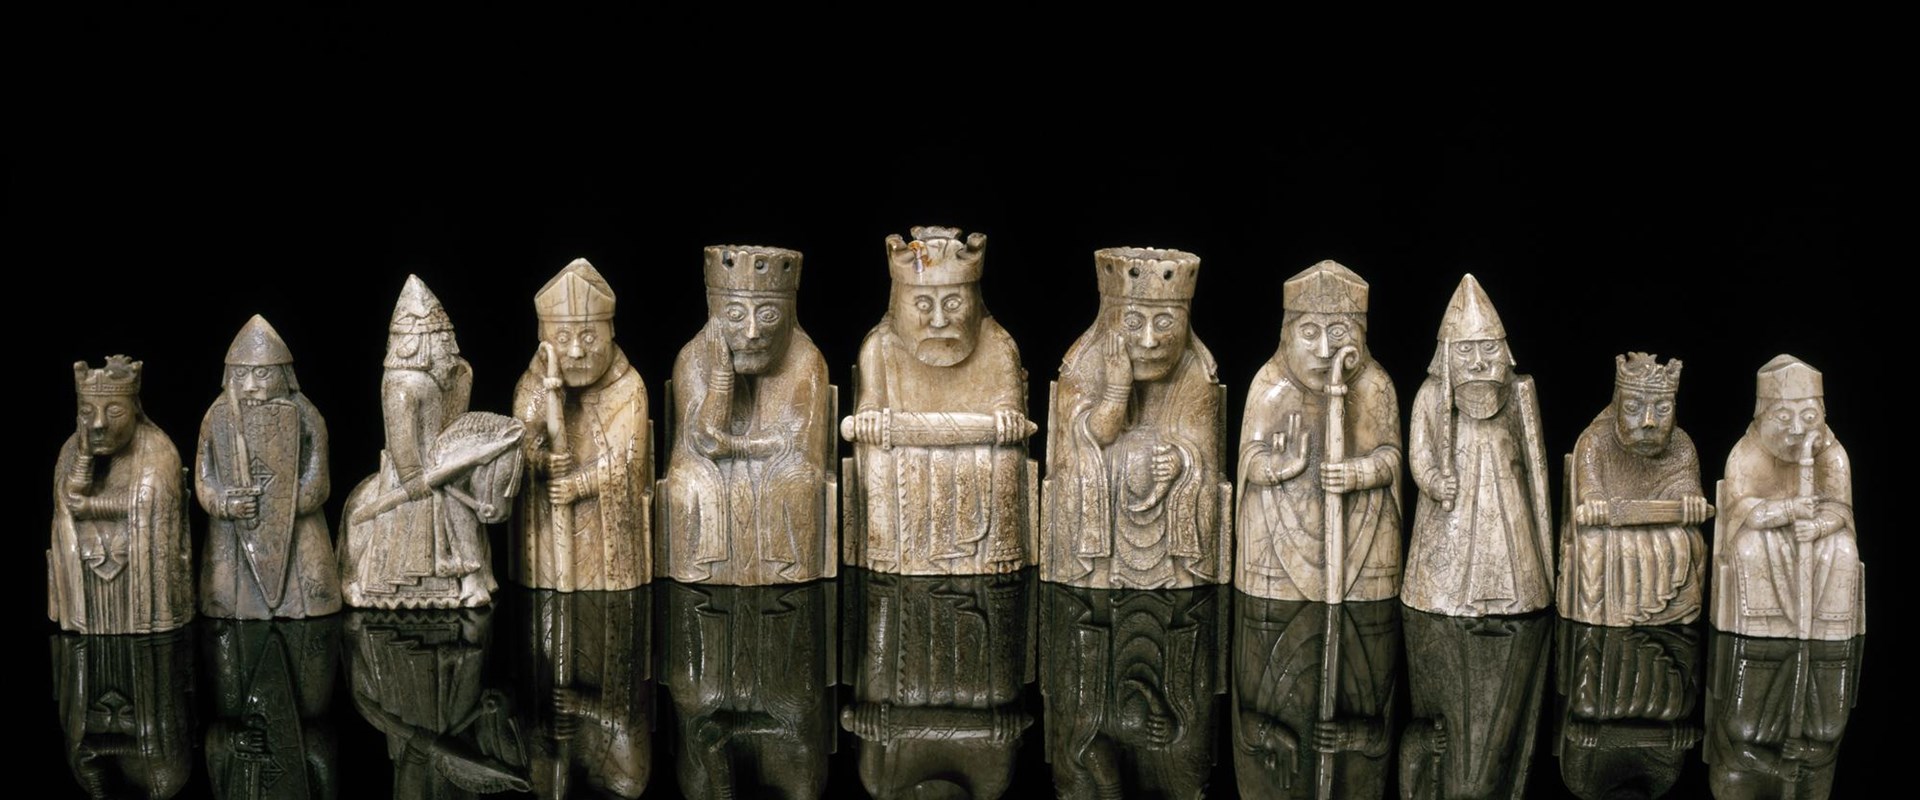 11 Lewis chess pieces - small carvings of various figures made of walrus ivory and sperm whale tooth